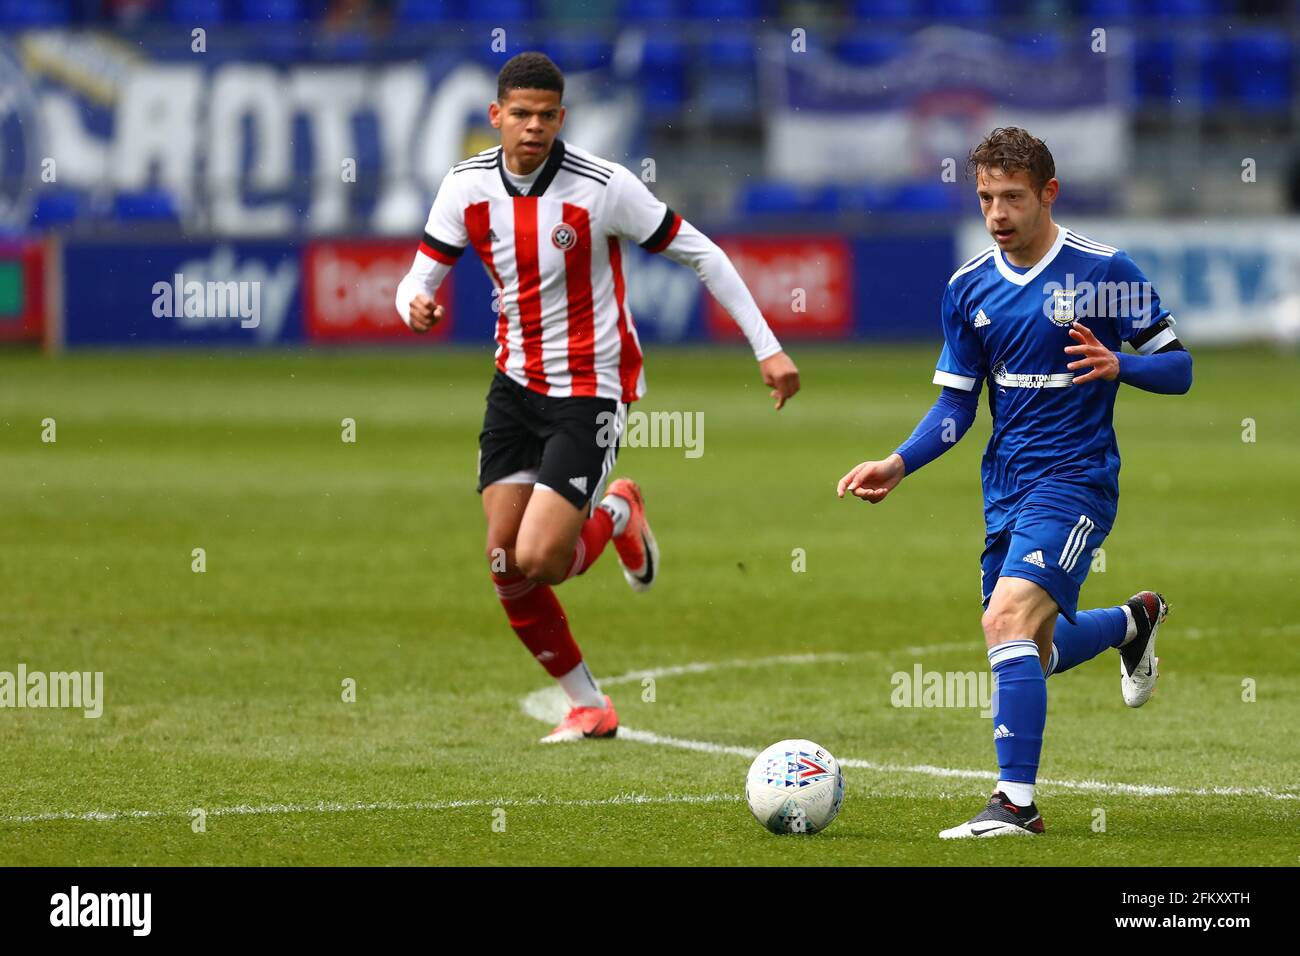 Fraser Alexander of Ipswich Town and Will Osula of Sheffield United - Ipswich Town U18 v Sheffield United U18, FA Youth Cup, Portman Road, Ipswich, UK - 30th April 2021 Stock Photo